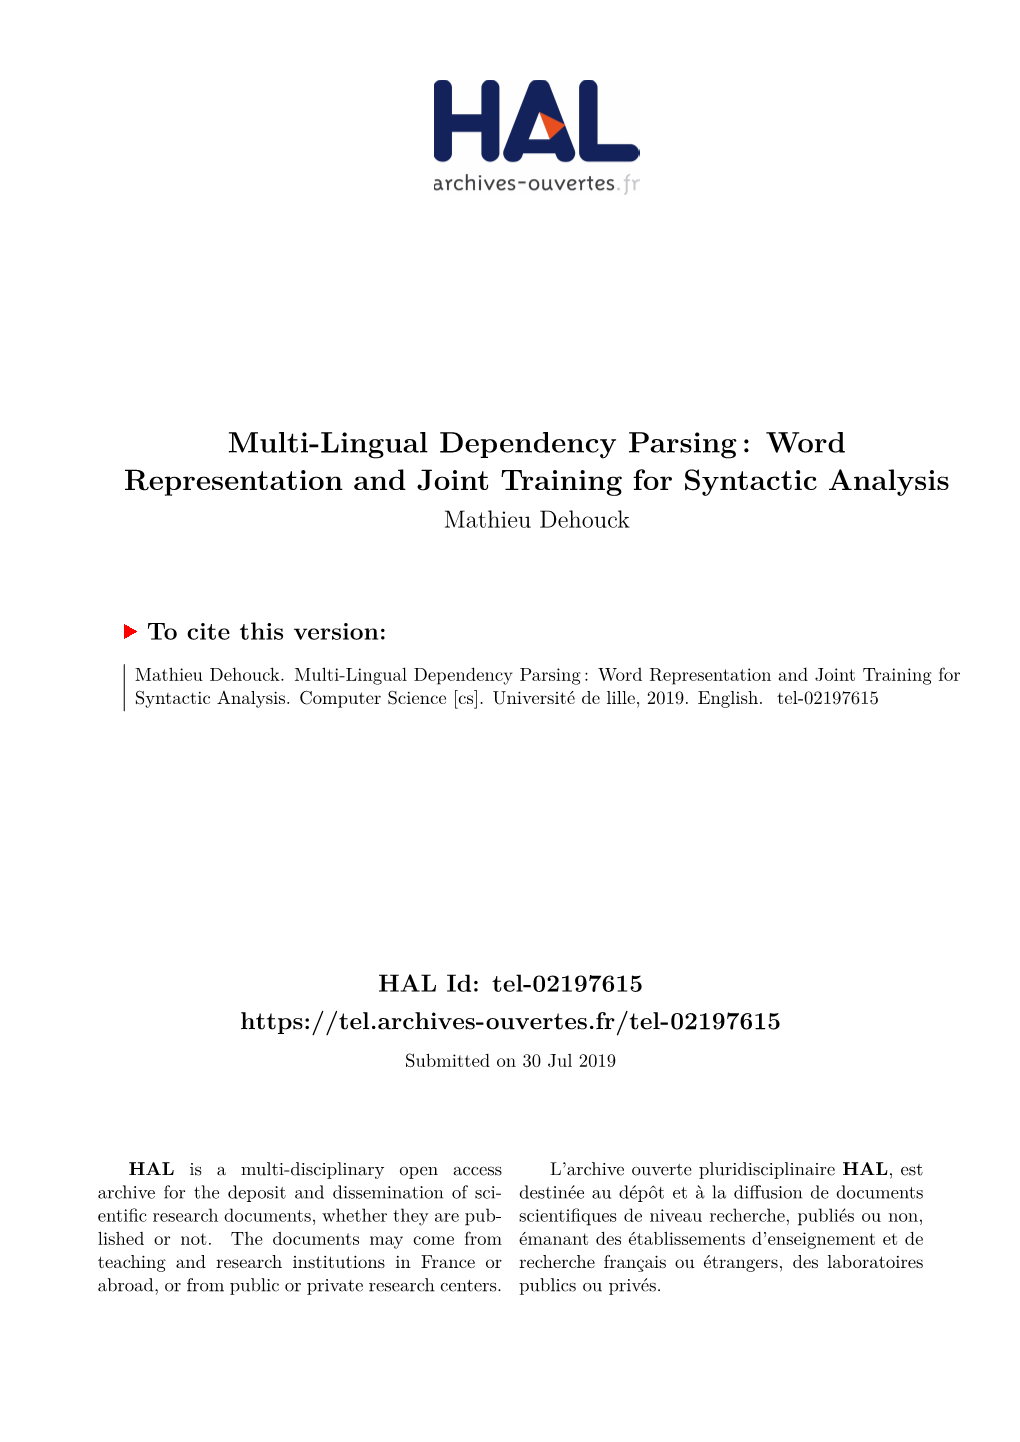 Multi-Lingual Dependency Parsing: Word Representation and Joint